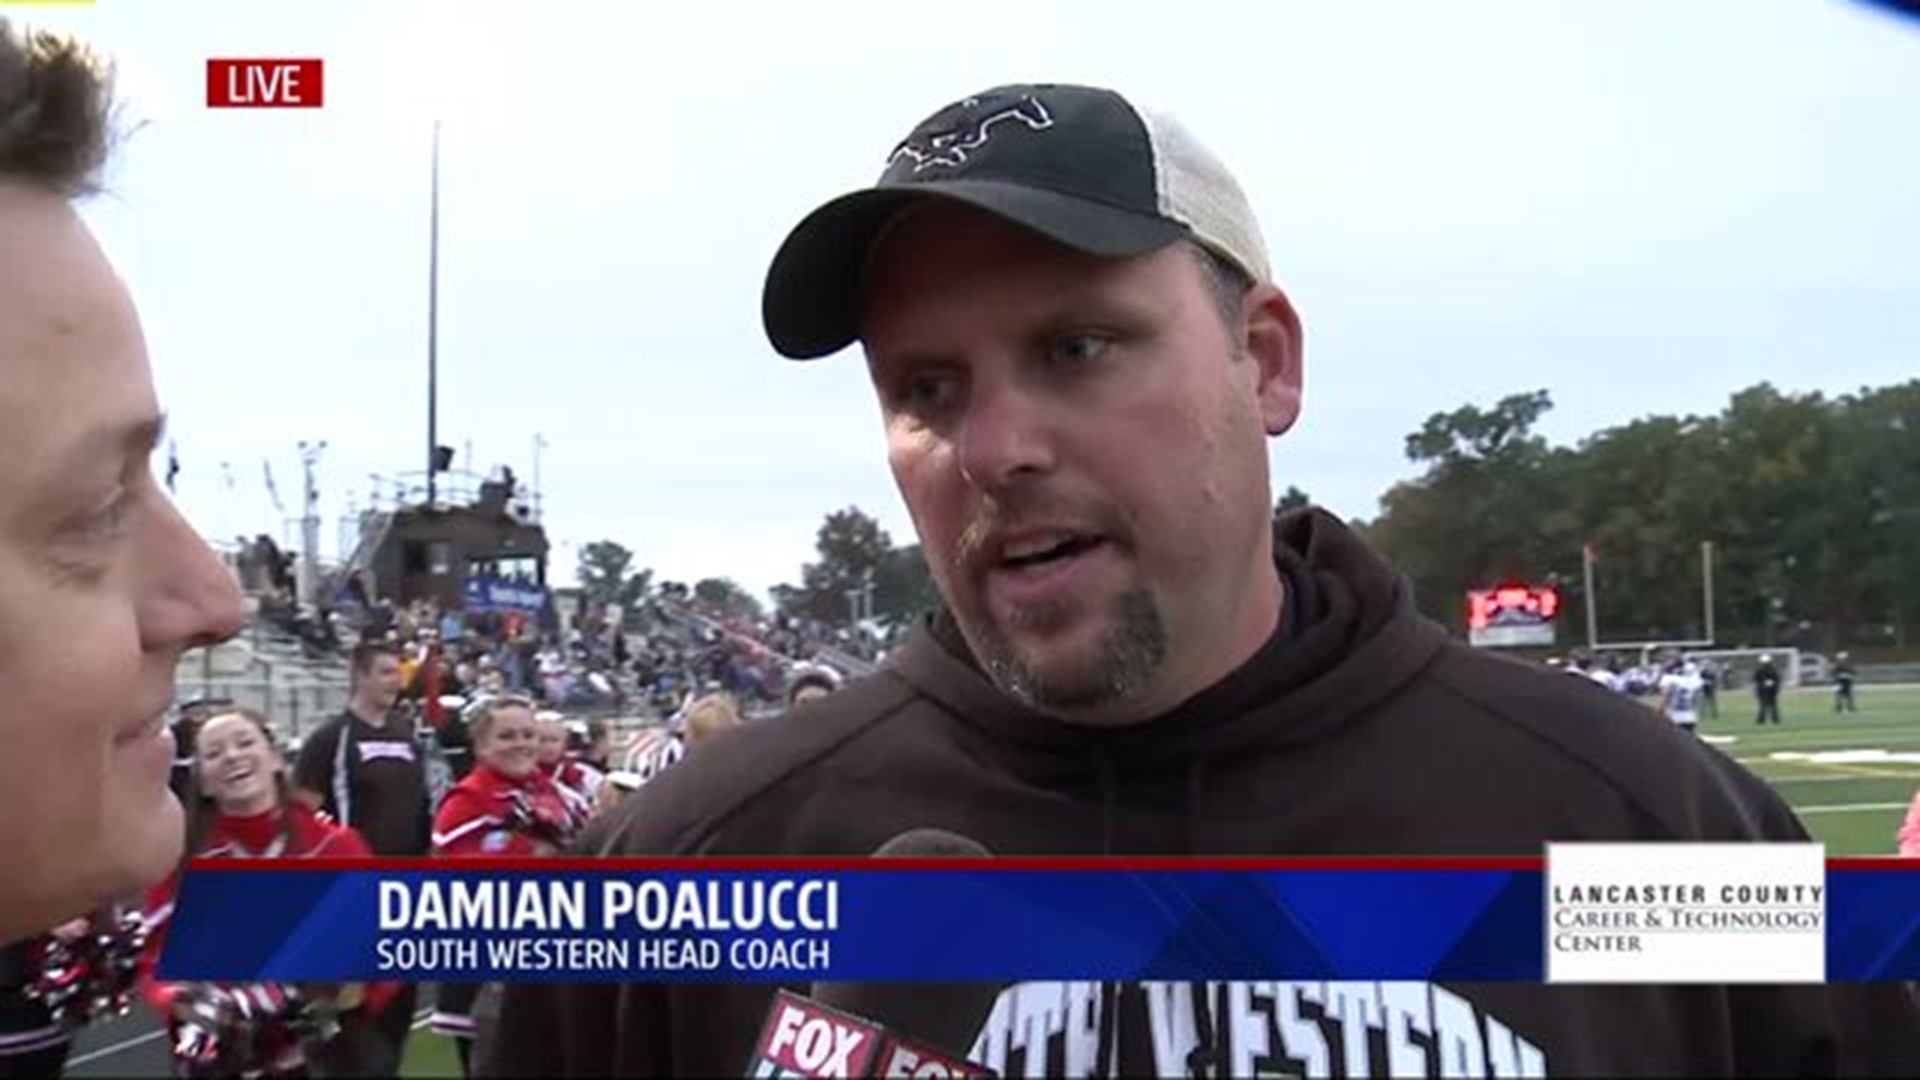 HSFF: Interview with South Western Head Coach Damian Poalucci